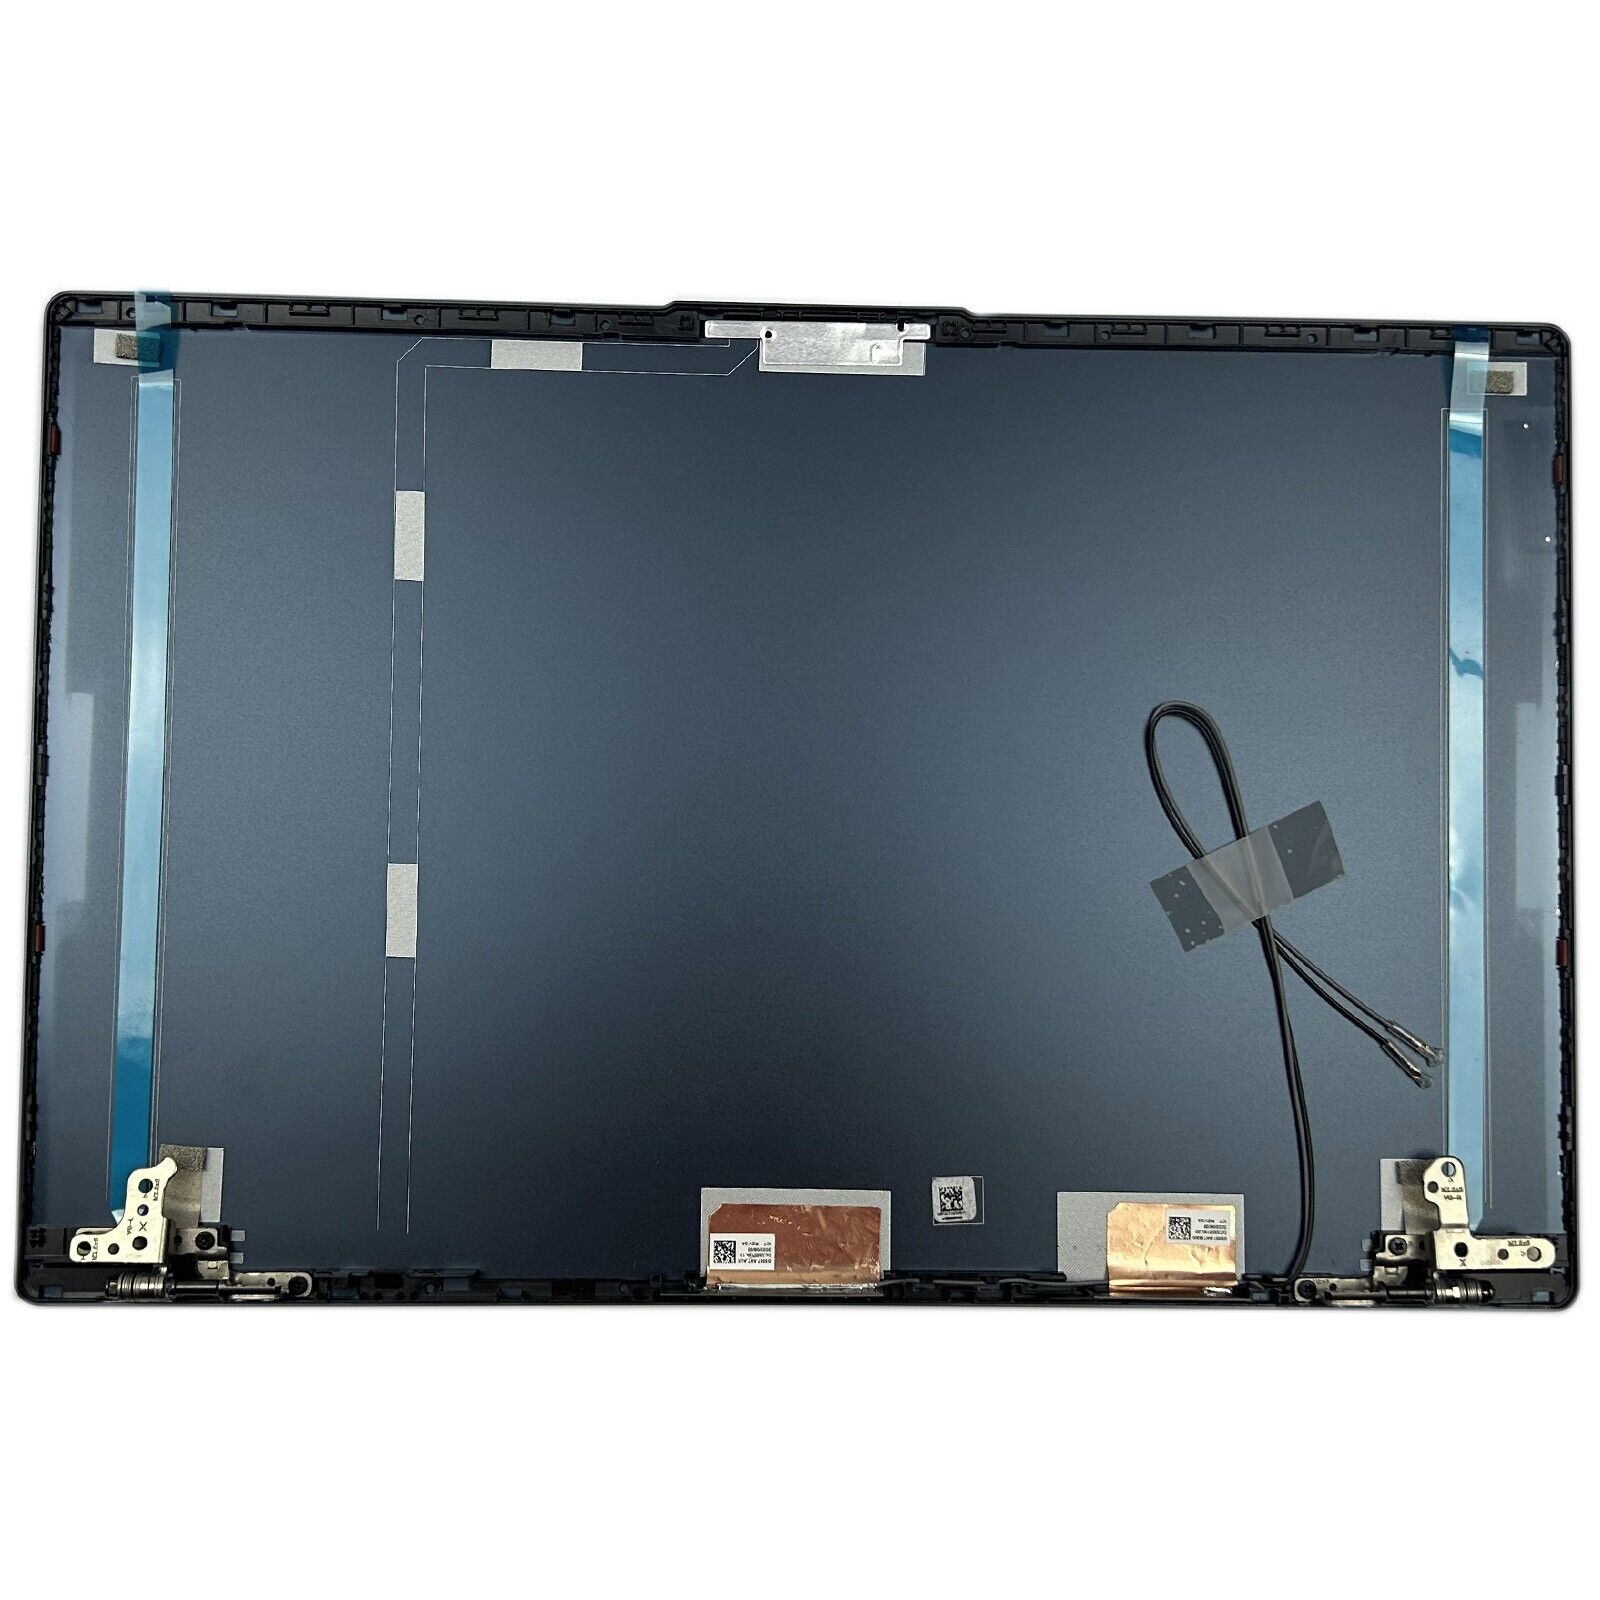 New Lenovo ideapad 5 15IIL05 15ITL05 15ARE05 Lcd Back Cover Top Lid Hinges A+ US